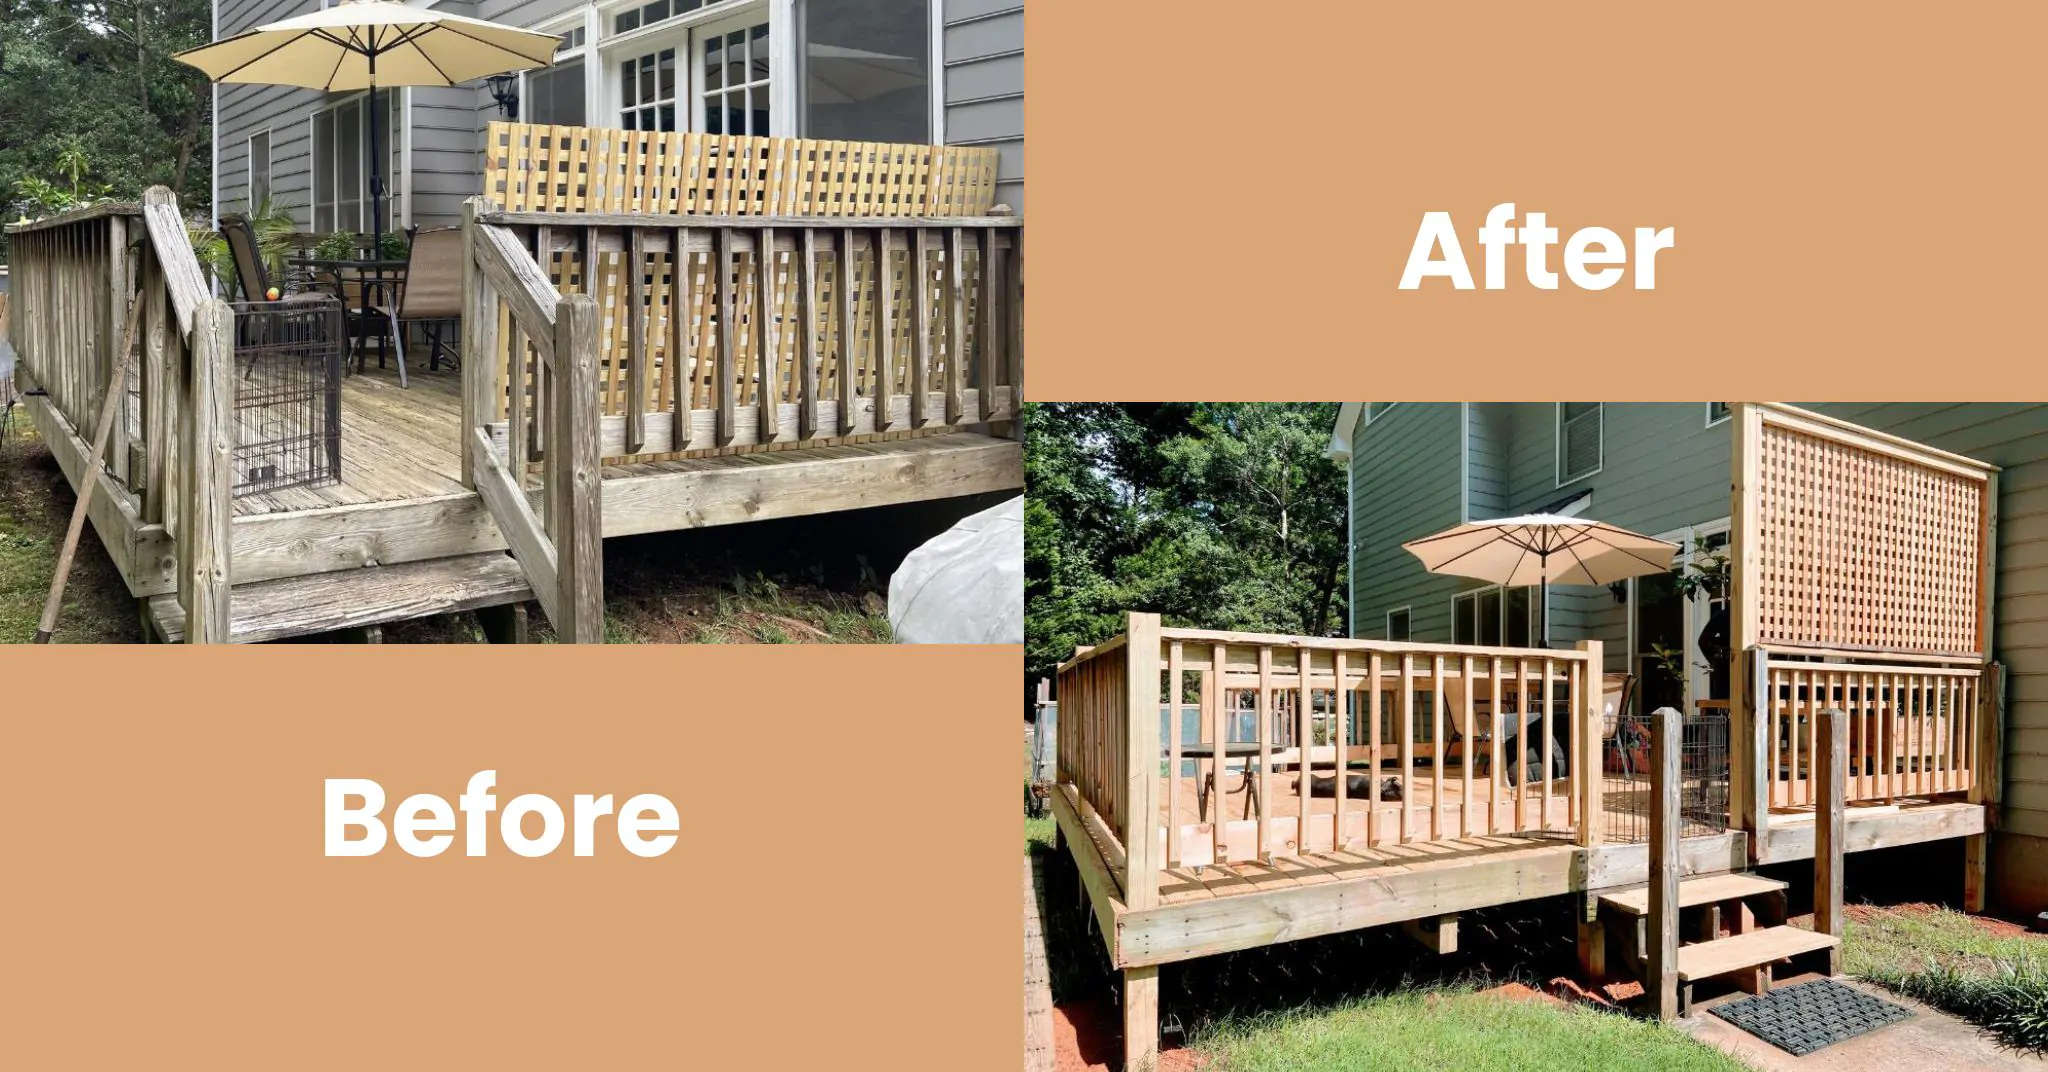 Before and After Patio Design Service - All Pro Cherry Hill Deck Builders